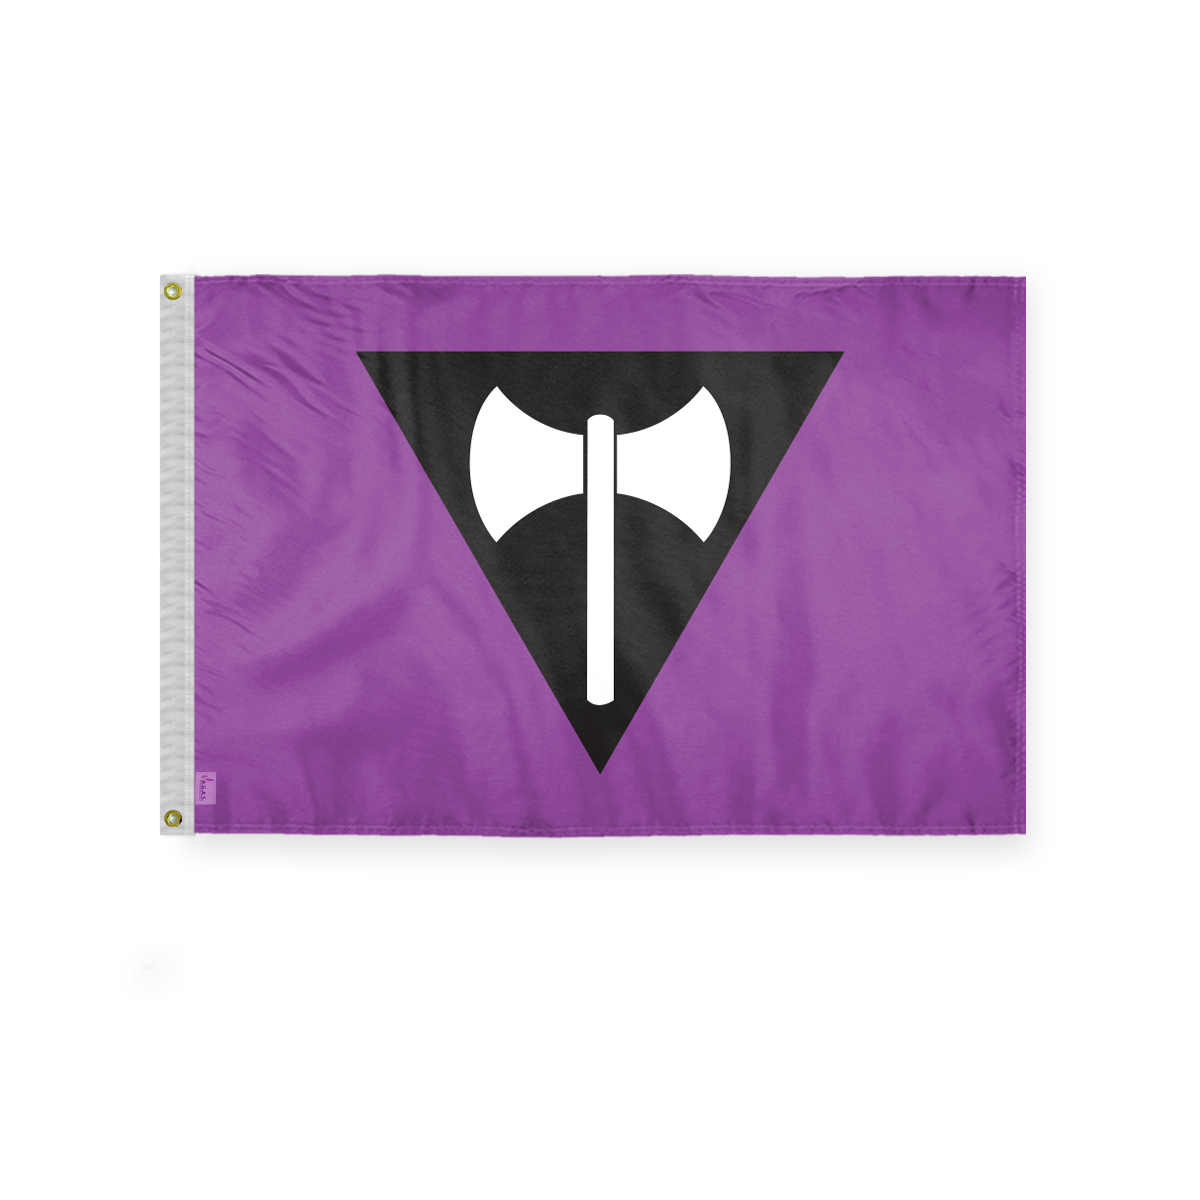 AGAS Lesbian Pride Flag 3x5 Ft - Double Sided Polyester